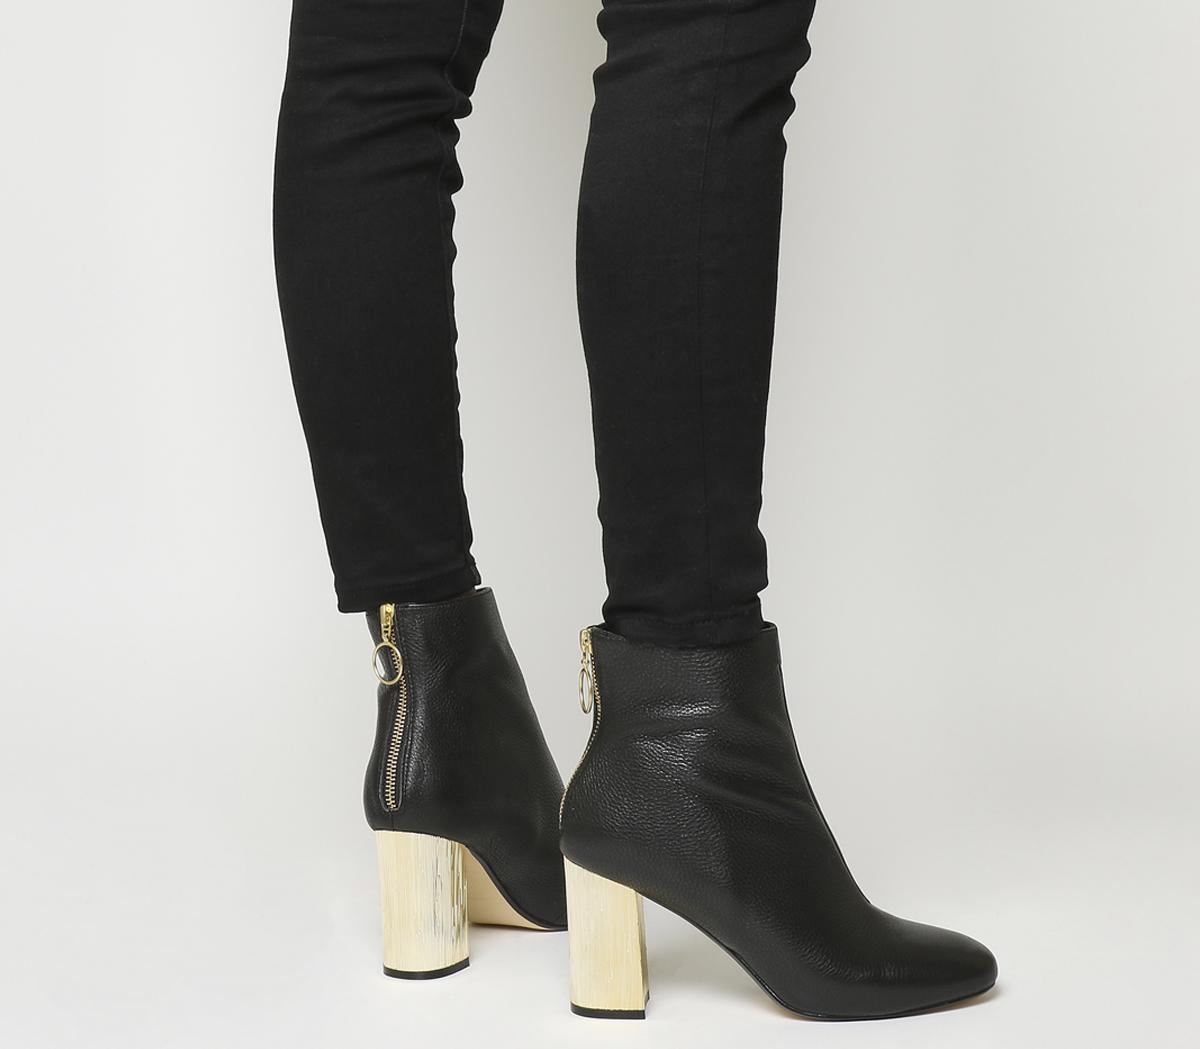 black high heel ankle boots